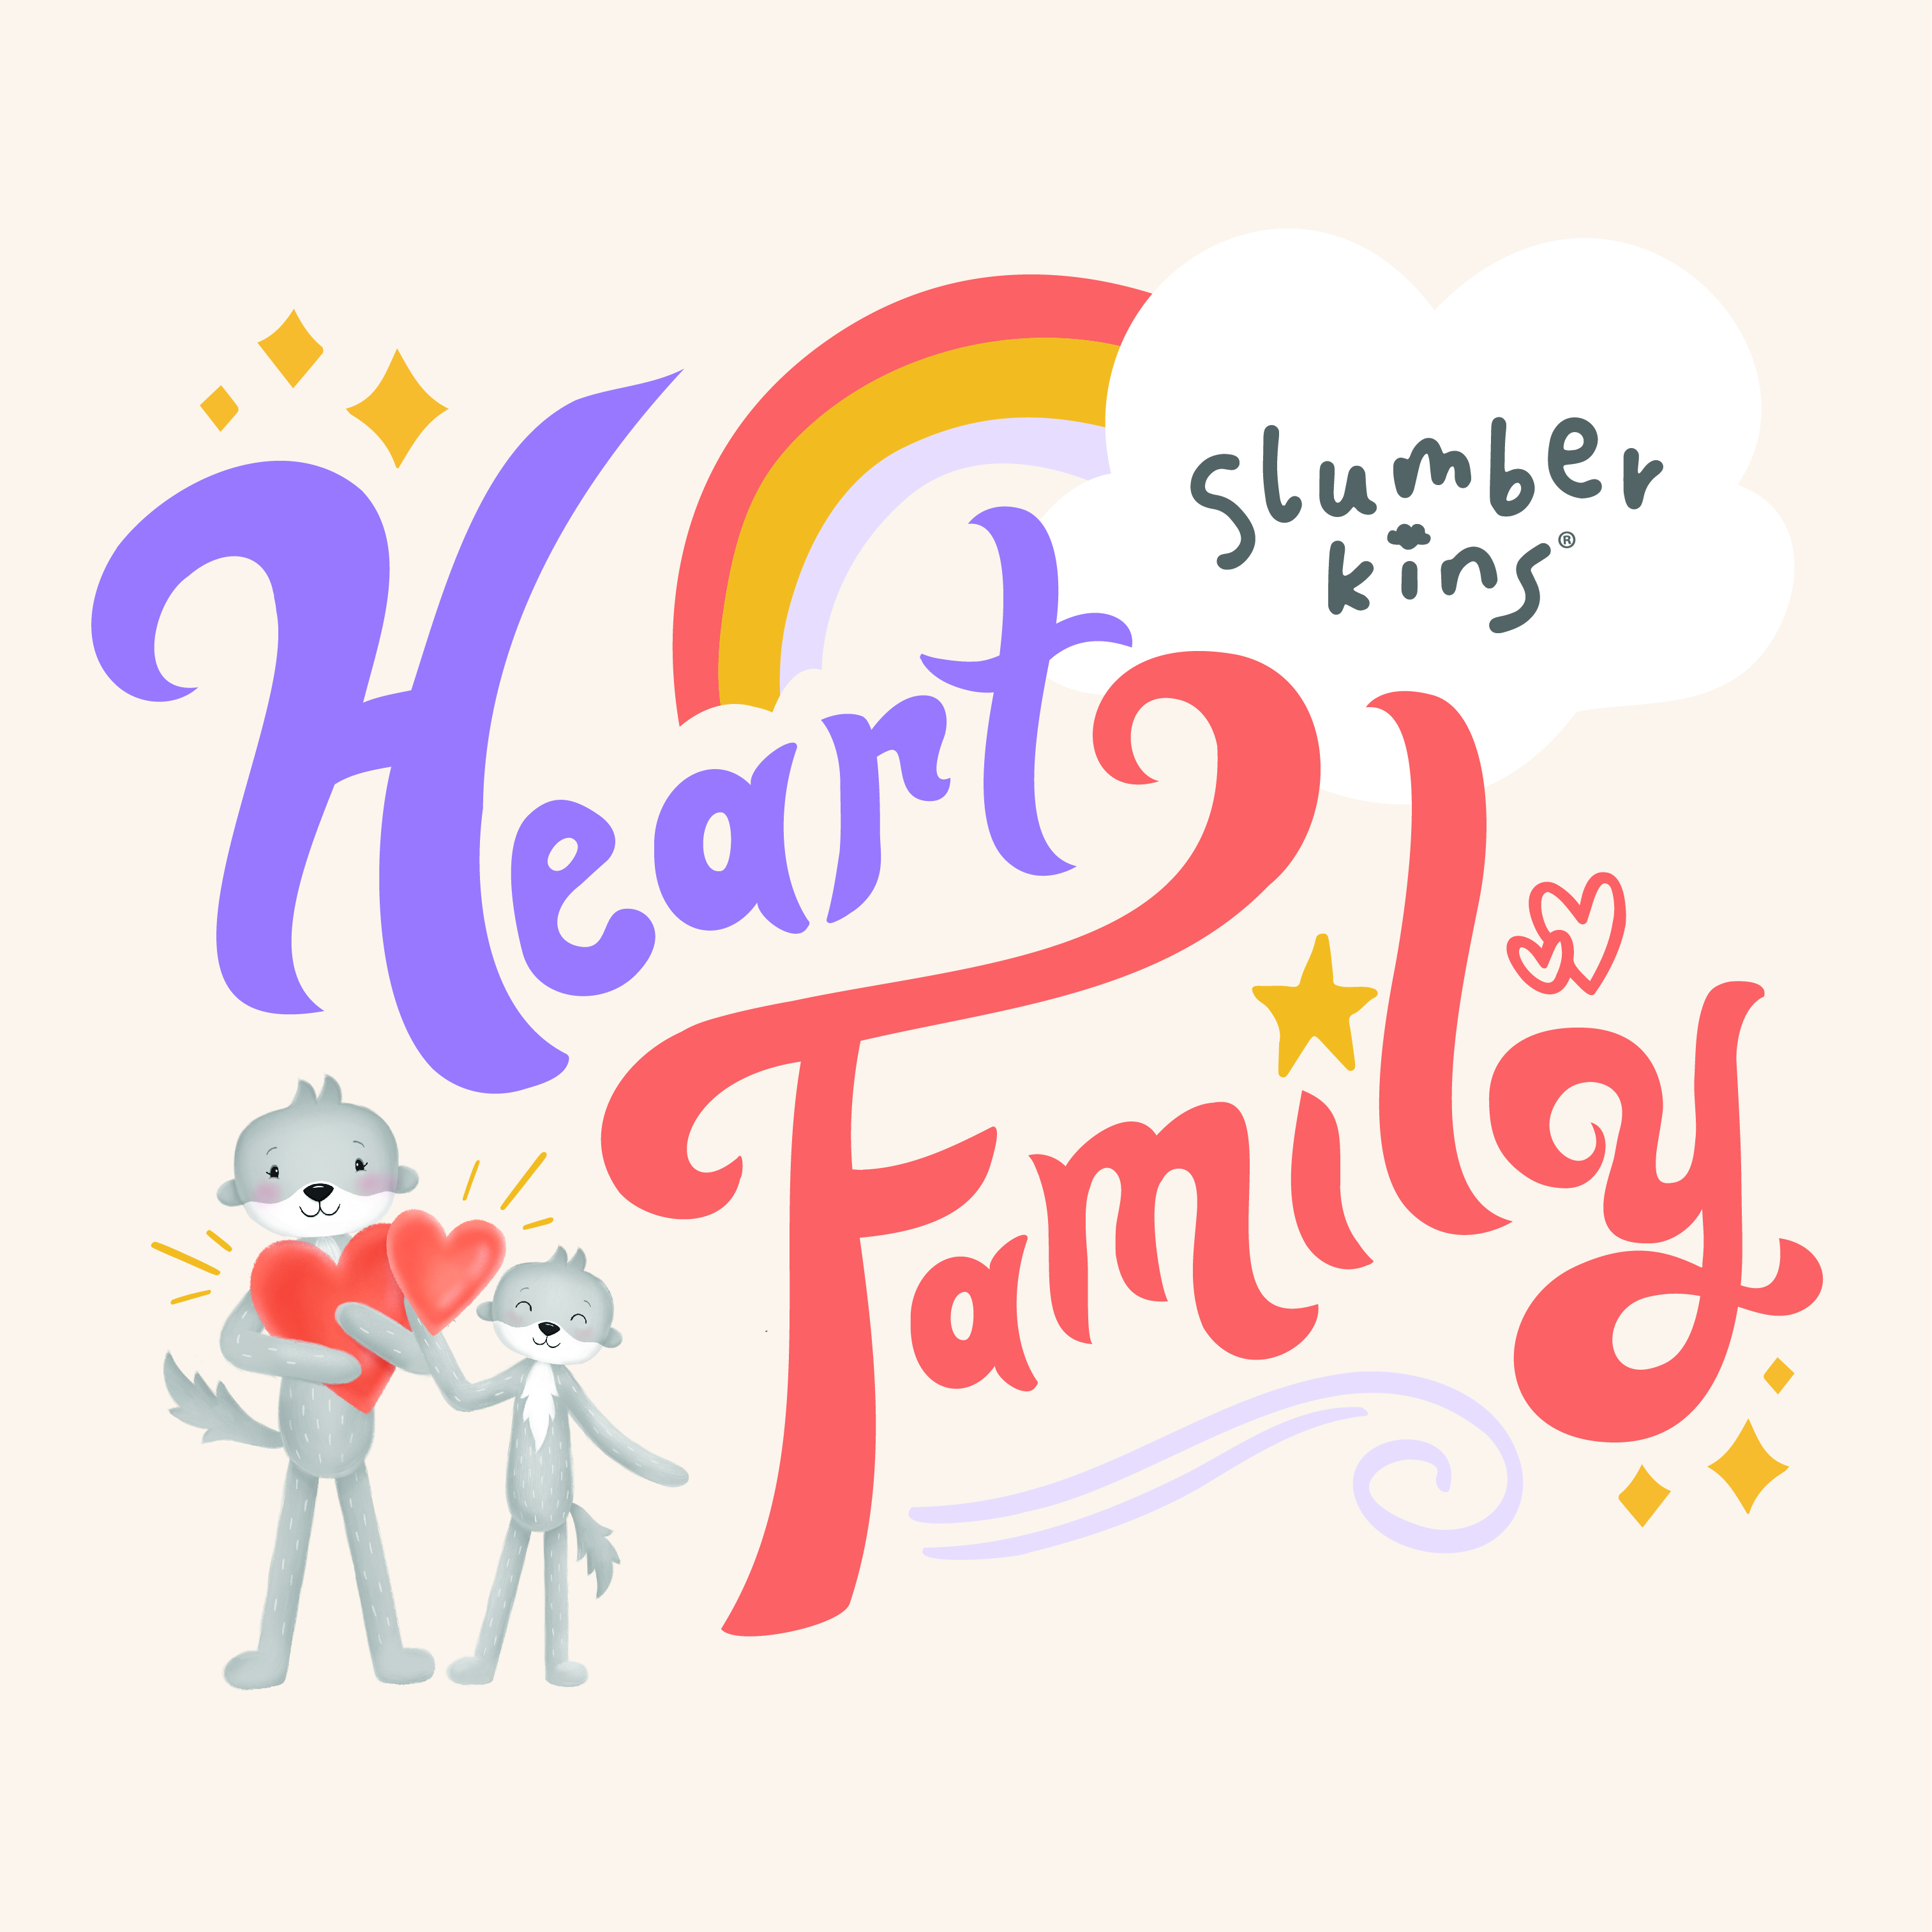 Heart Family graphic art for single song release